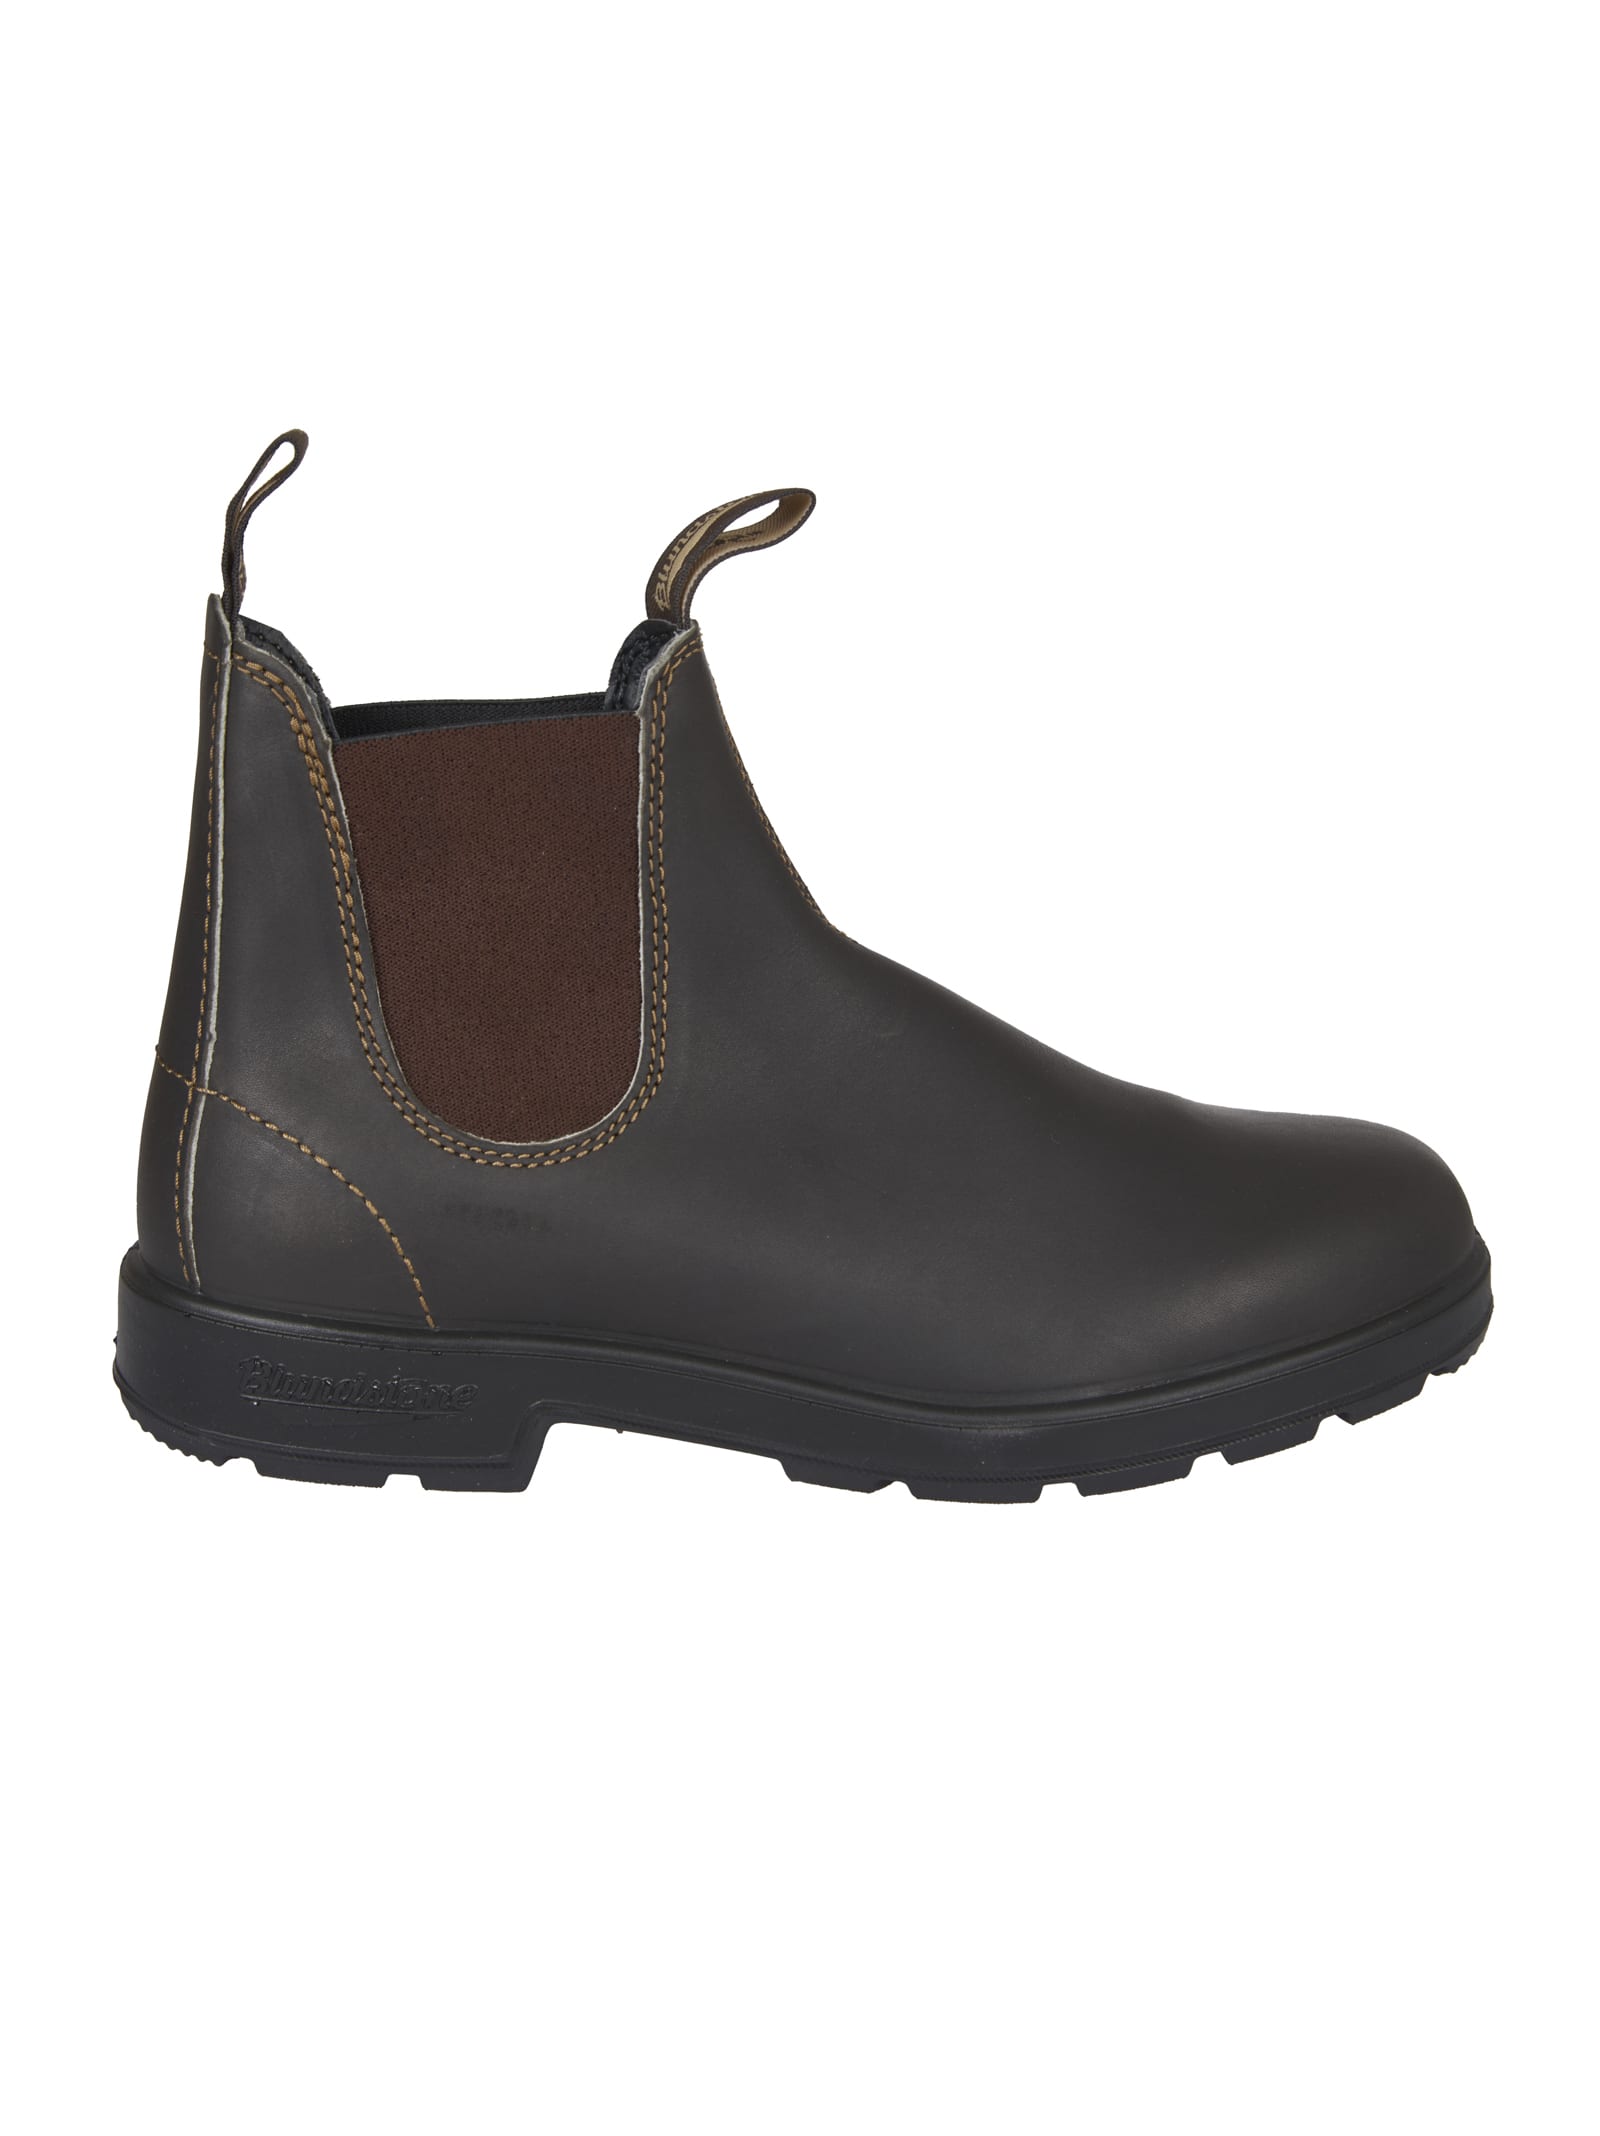 Blundstone Brown 510 Ankle Boots